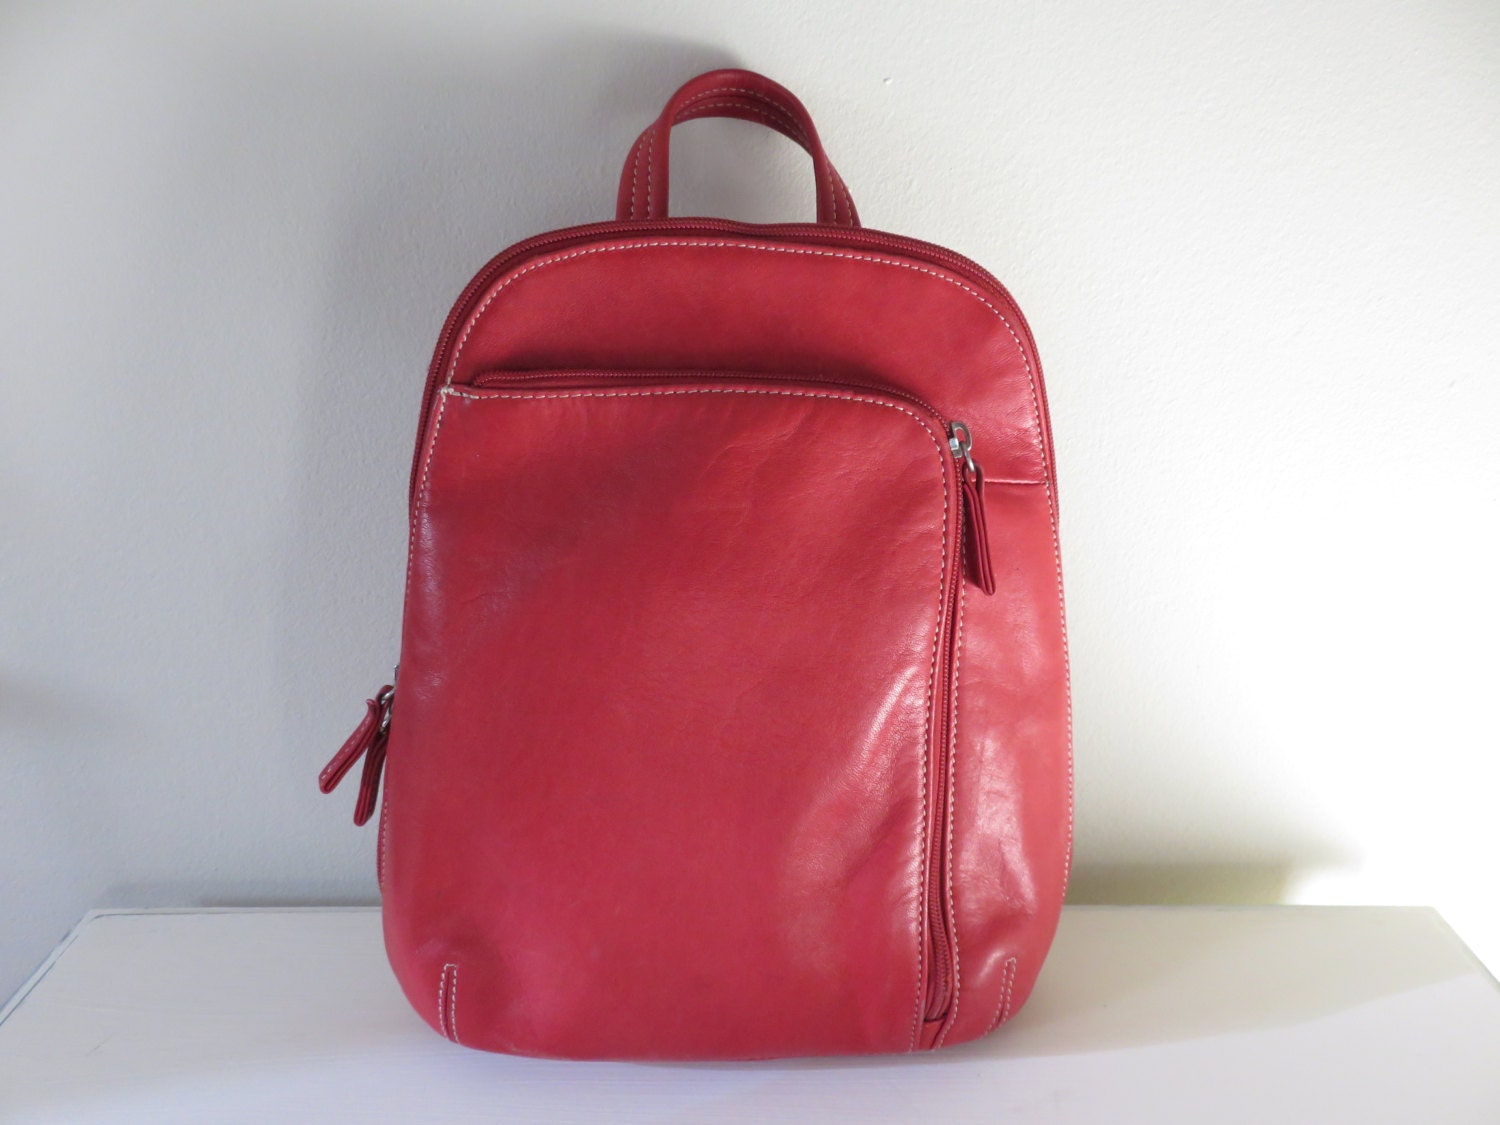 Vintage Red leather Tignanello Backpack purse in Excellent